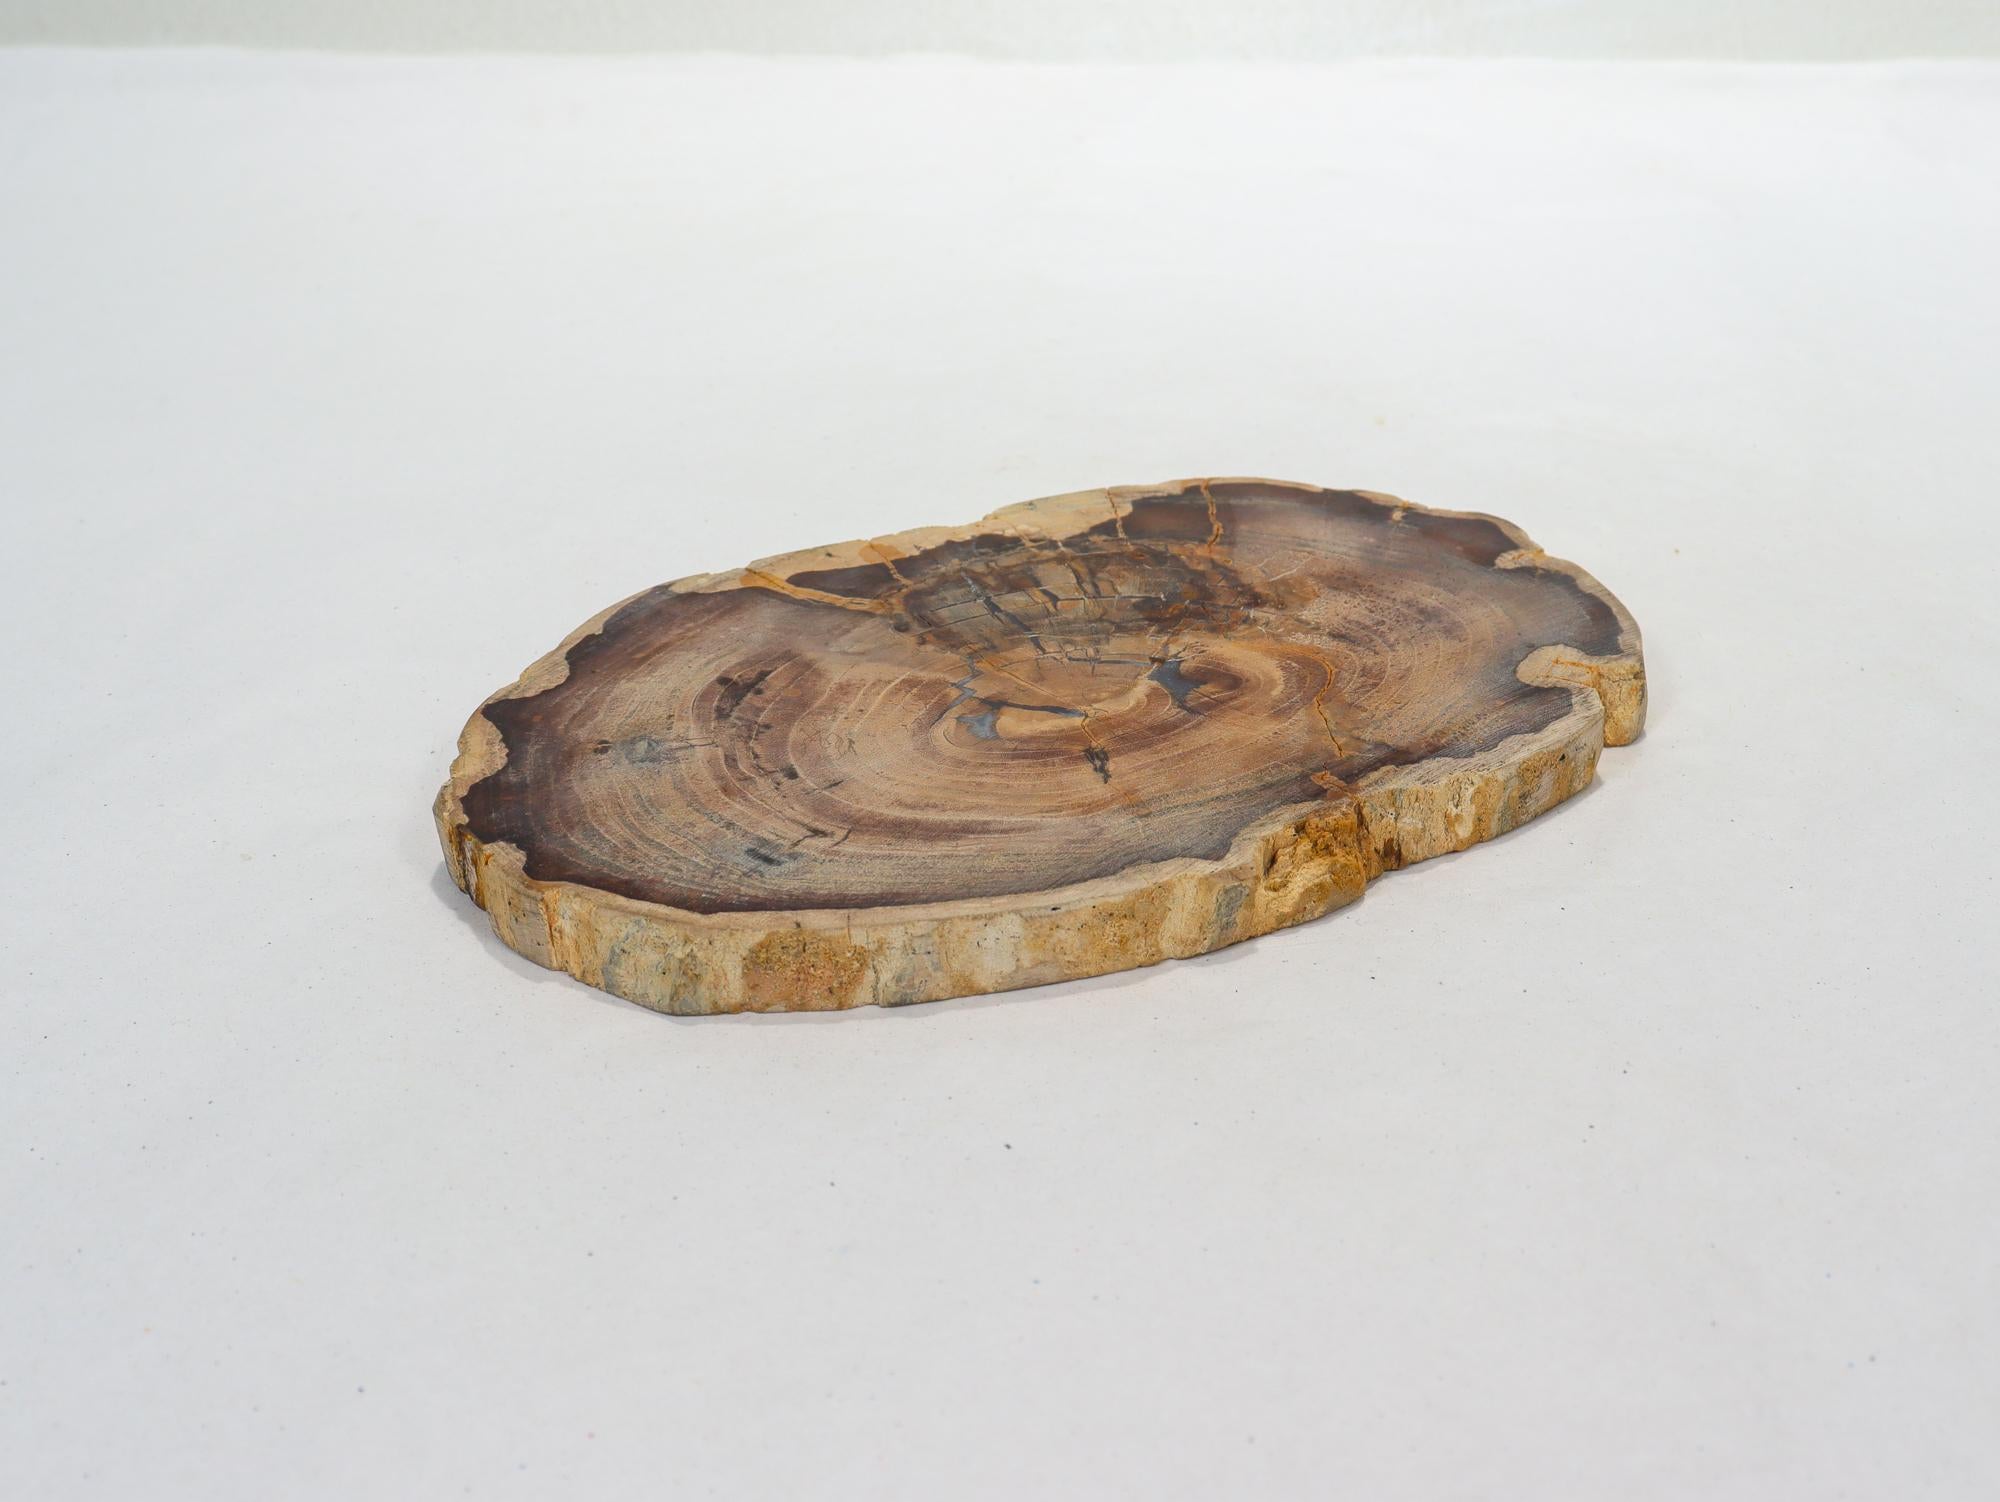 18th Century and Earlier Cherry Tree Species Petrified Wood Cross Cut Slice Specimen For Sale